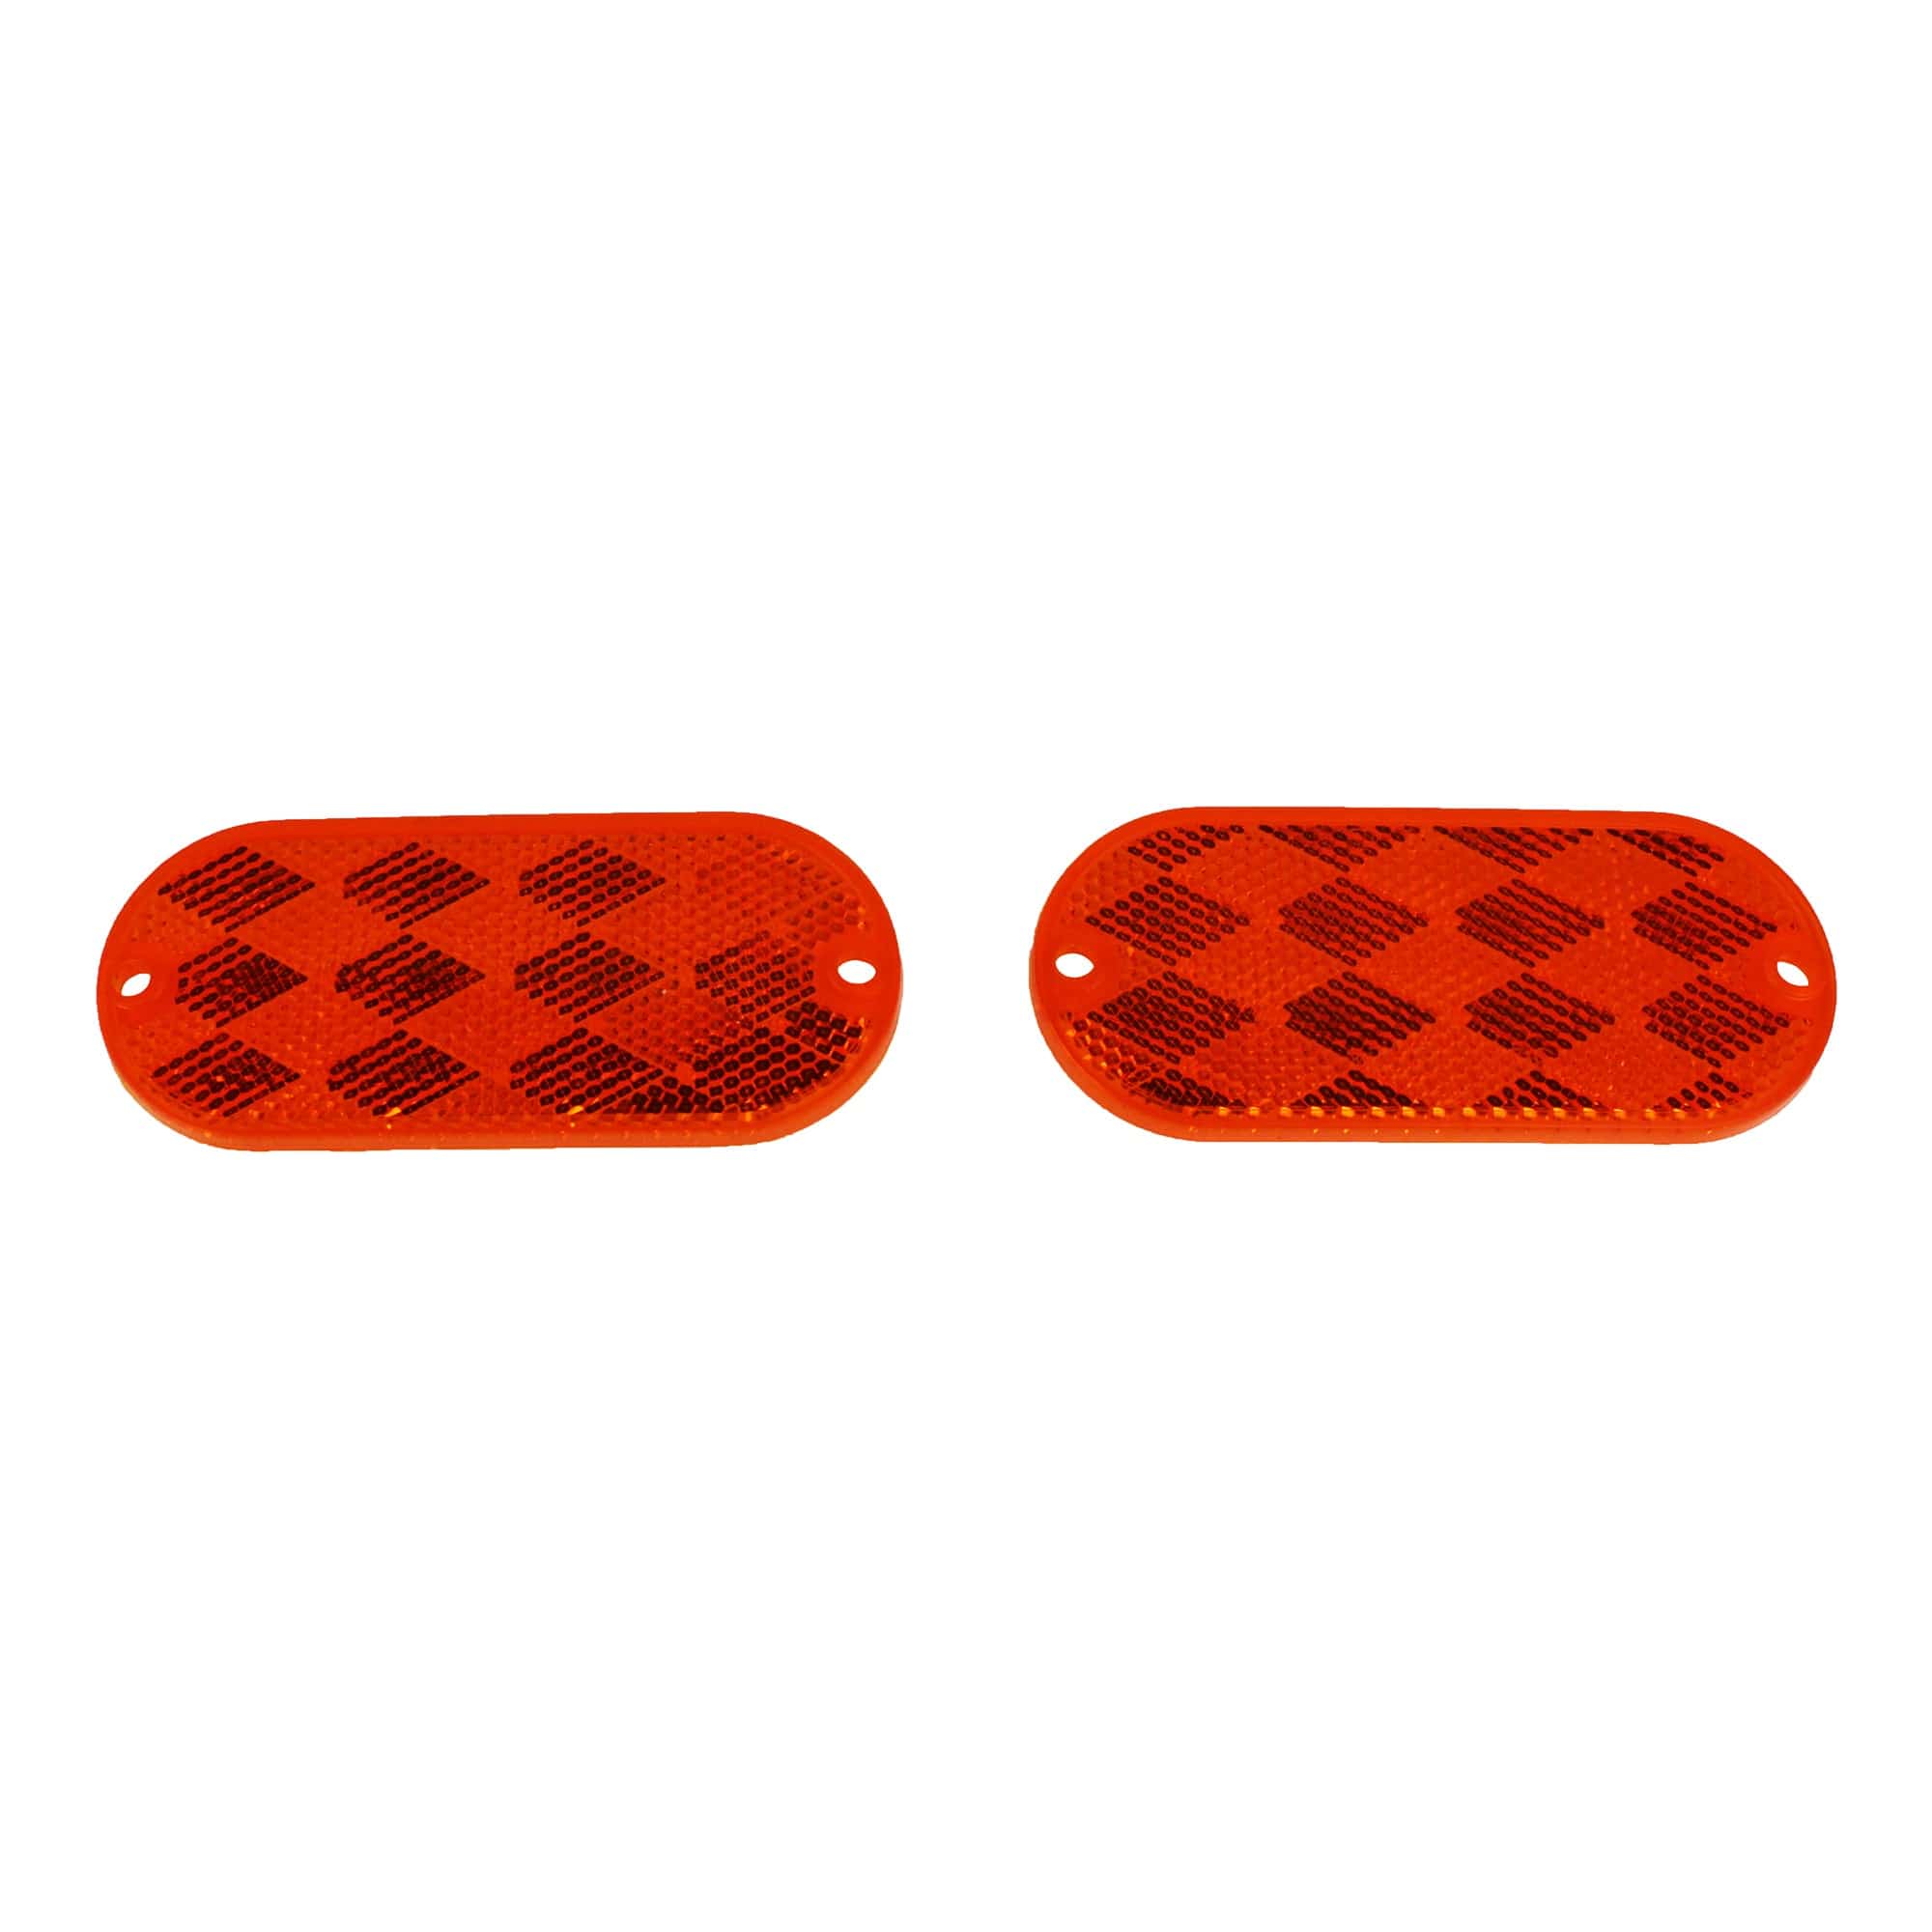 Anderson Marine / Peterson MFG V480A Oblong, Quick-Mount Reflectors 4.37"x1.875" - Red